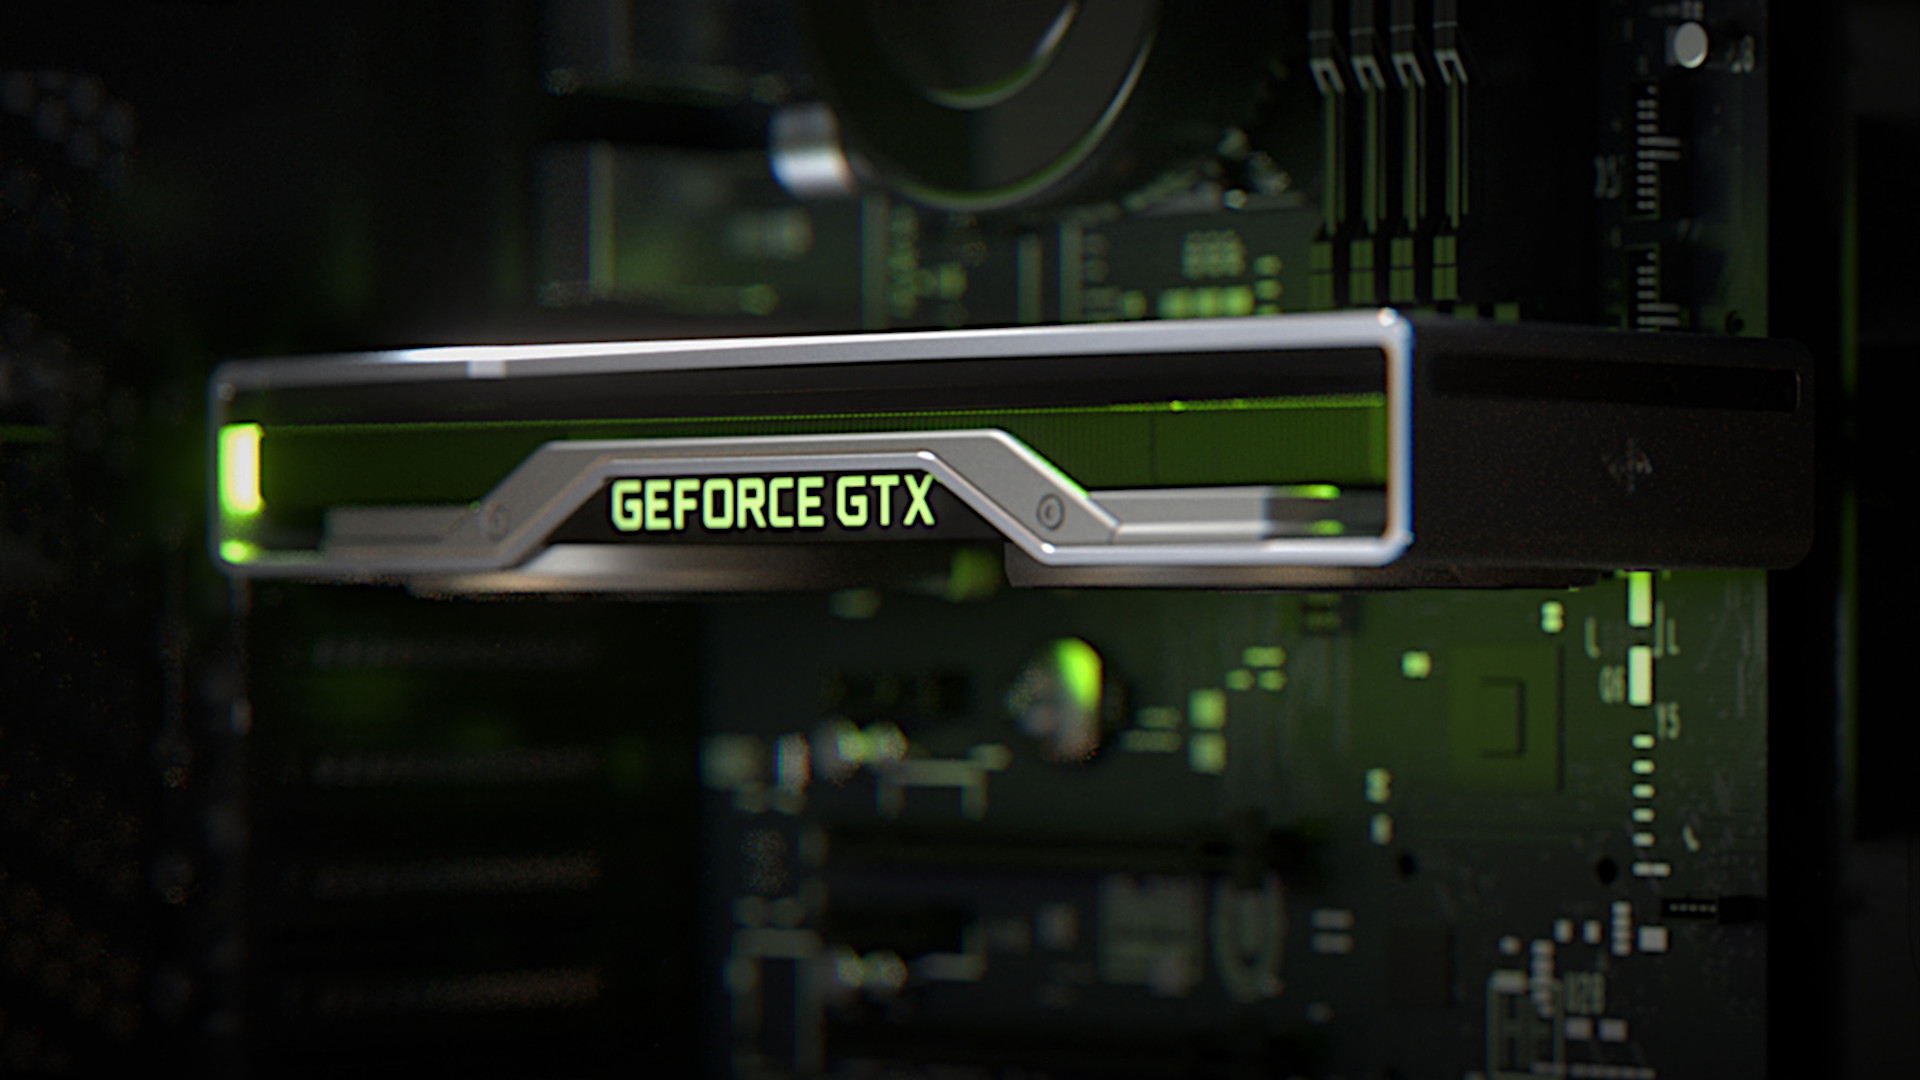 Nvidia RTX 4000 who? The GeForce GTX 1630 may be on its way